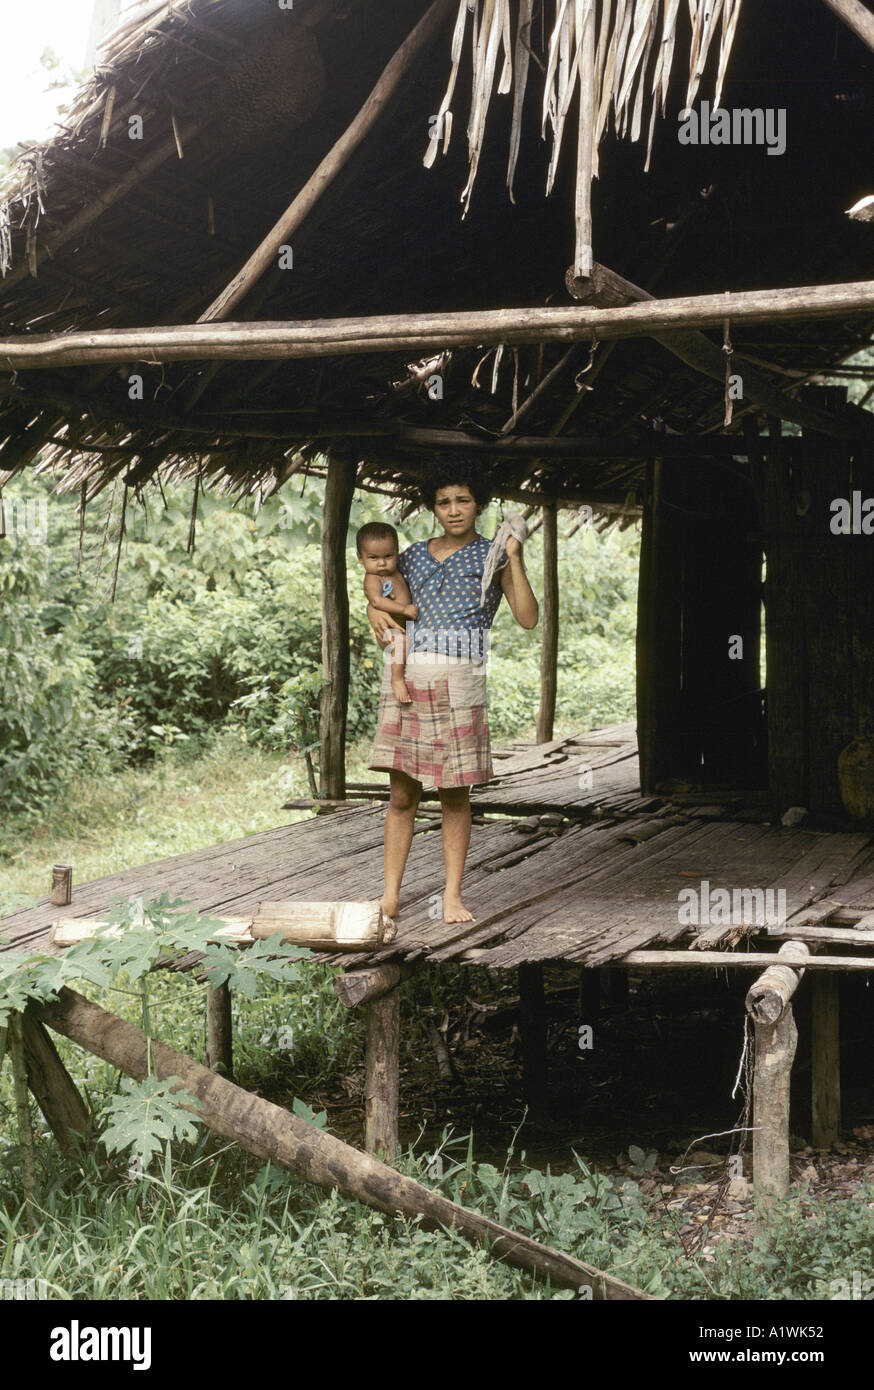 MOTHER AND CHILD , STANDING ON PORCH OF WOODEN THATCHED HOME AMAZONIA Stock Photo